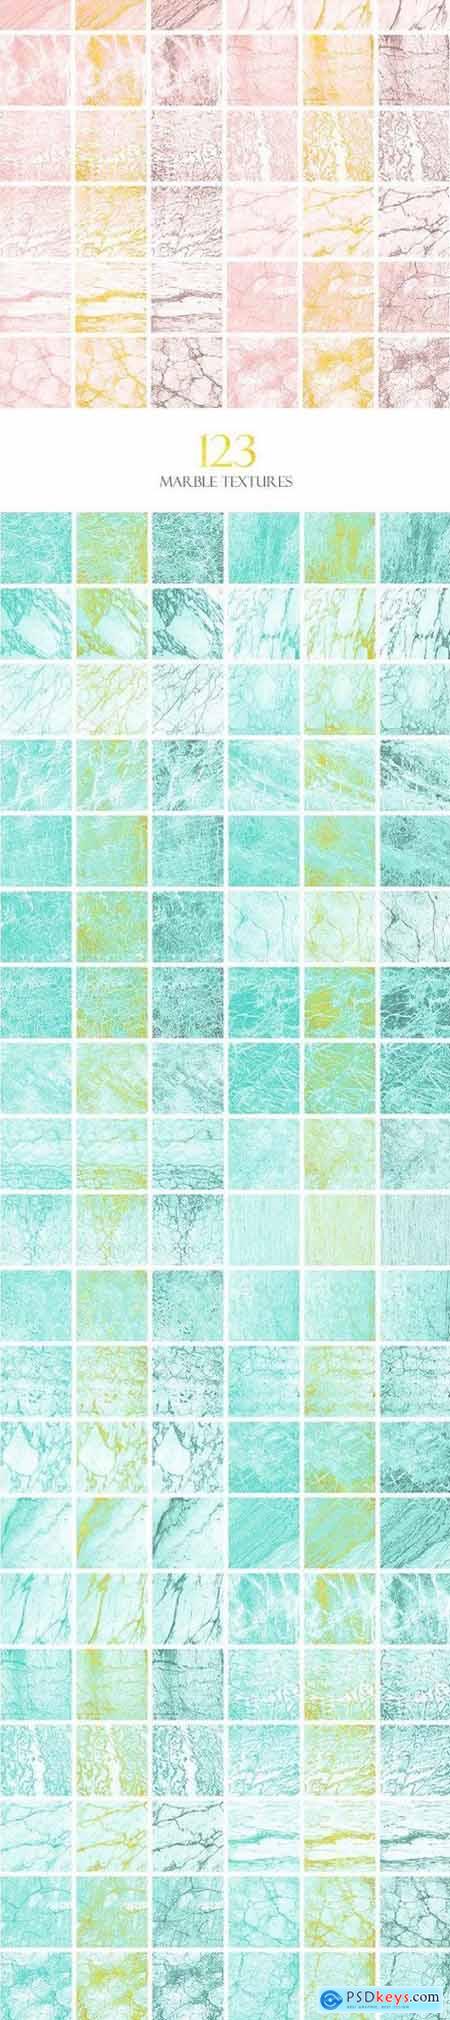 369 Marble Textures